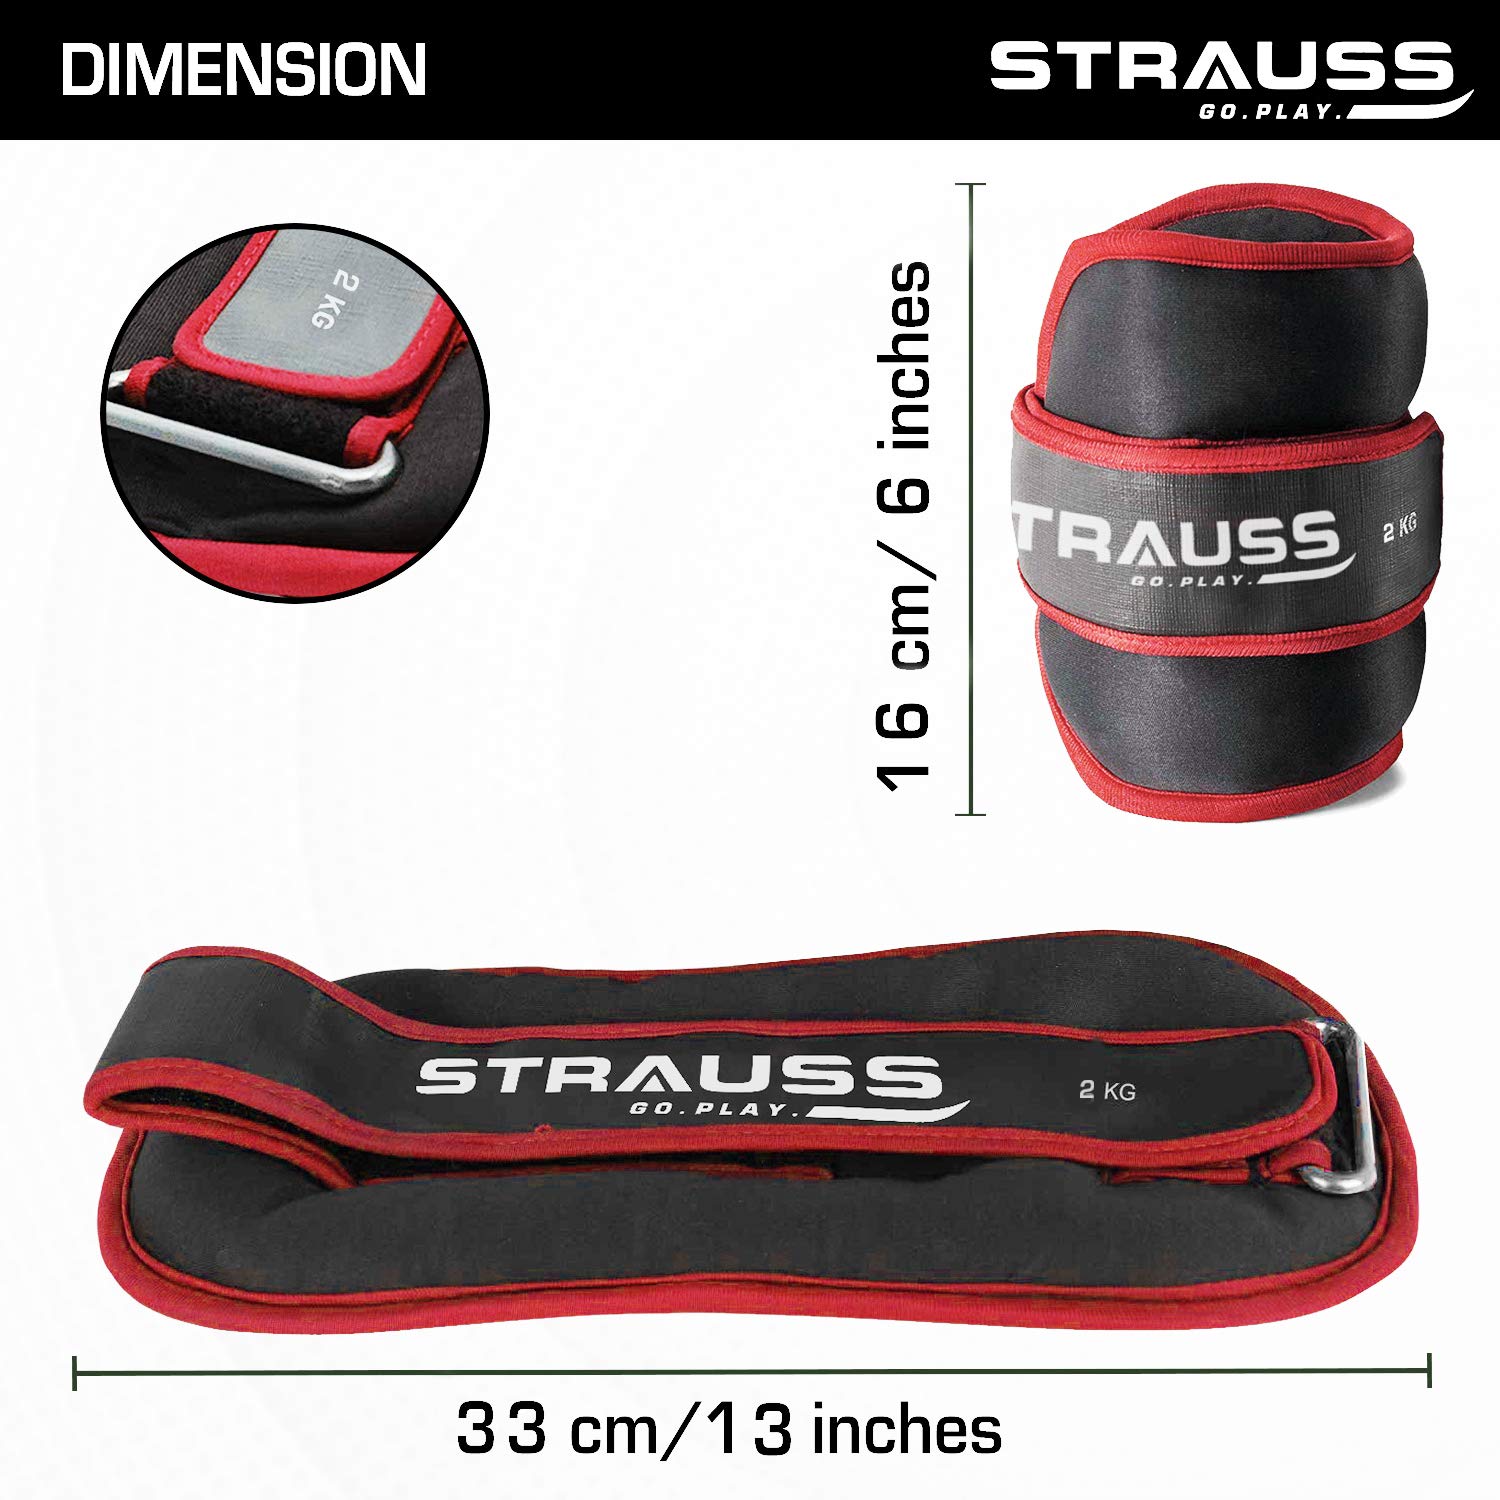 Strauss Round Shape Adjustable Ankle Weight/Wrist Weights 2 KG X 2 | Ideal for Walking, Running, Jogging, Cycling, Gym, Workout & Strength Training | Easy to Use on Ankle, Wrist, Leg, (Red)